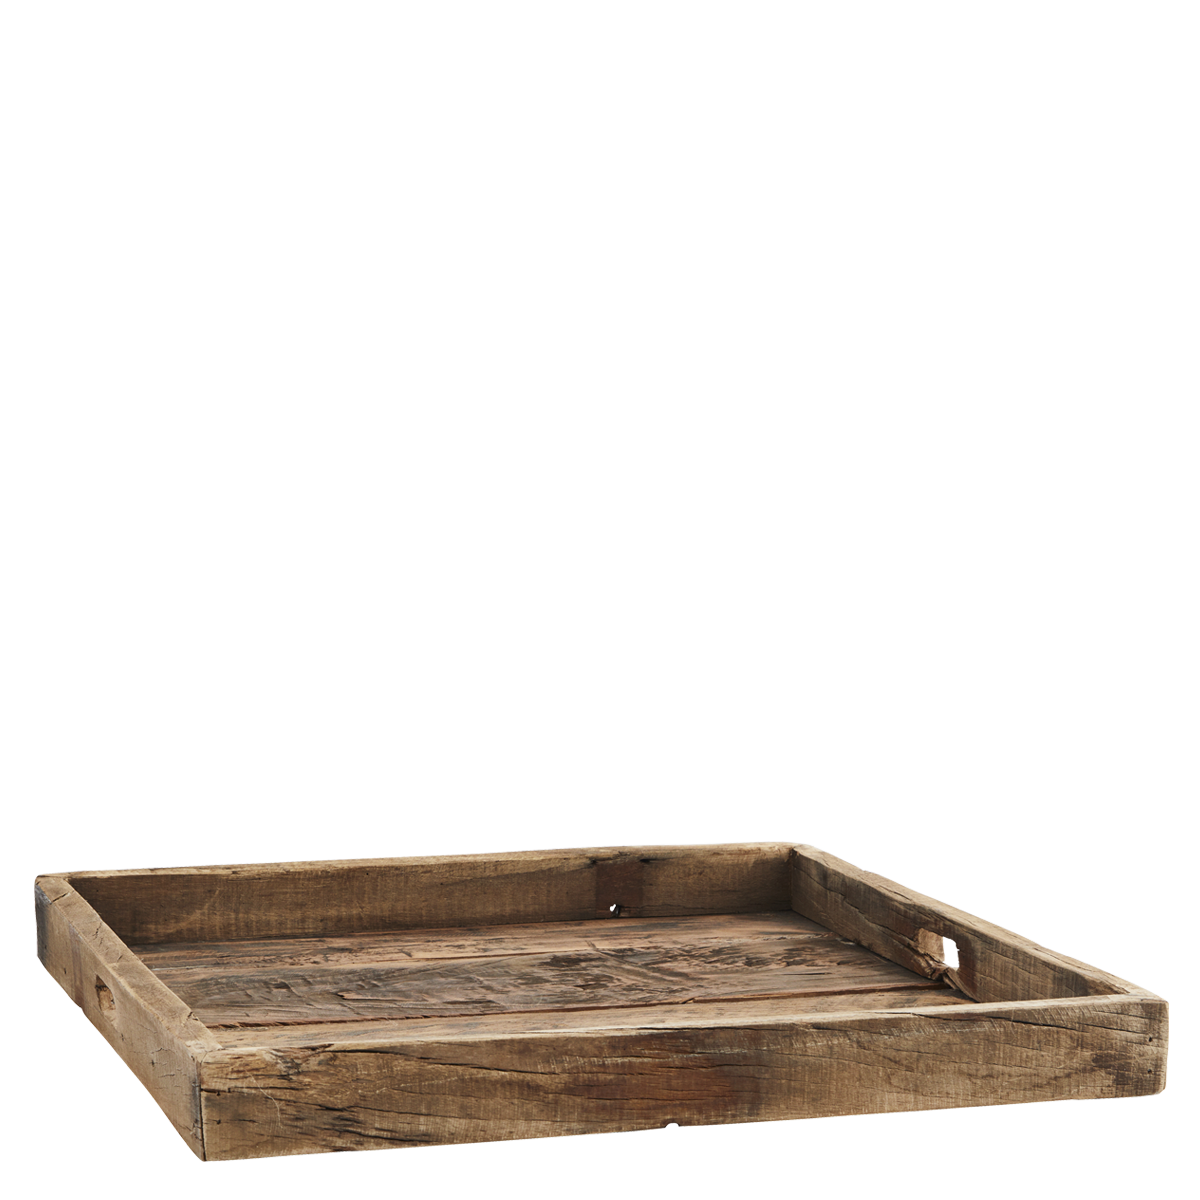 Recycled wooden tray